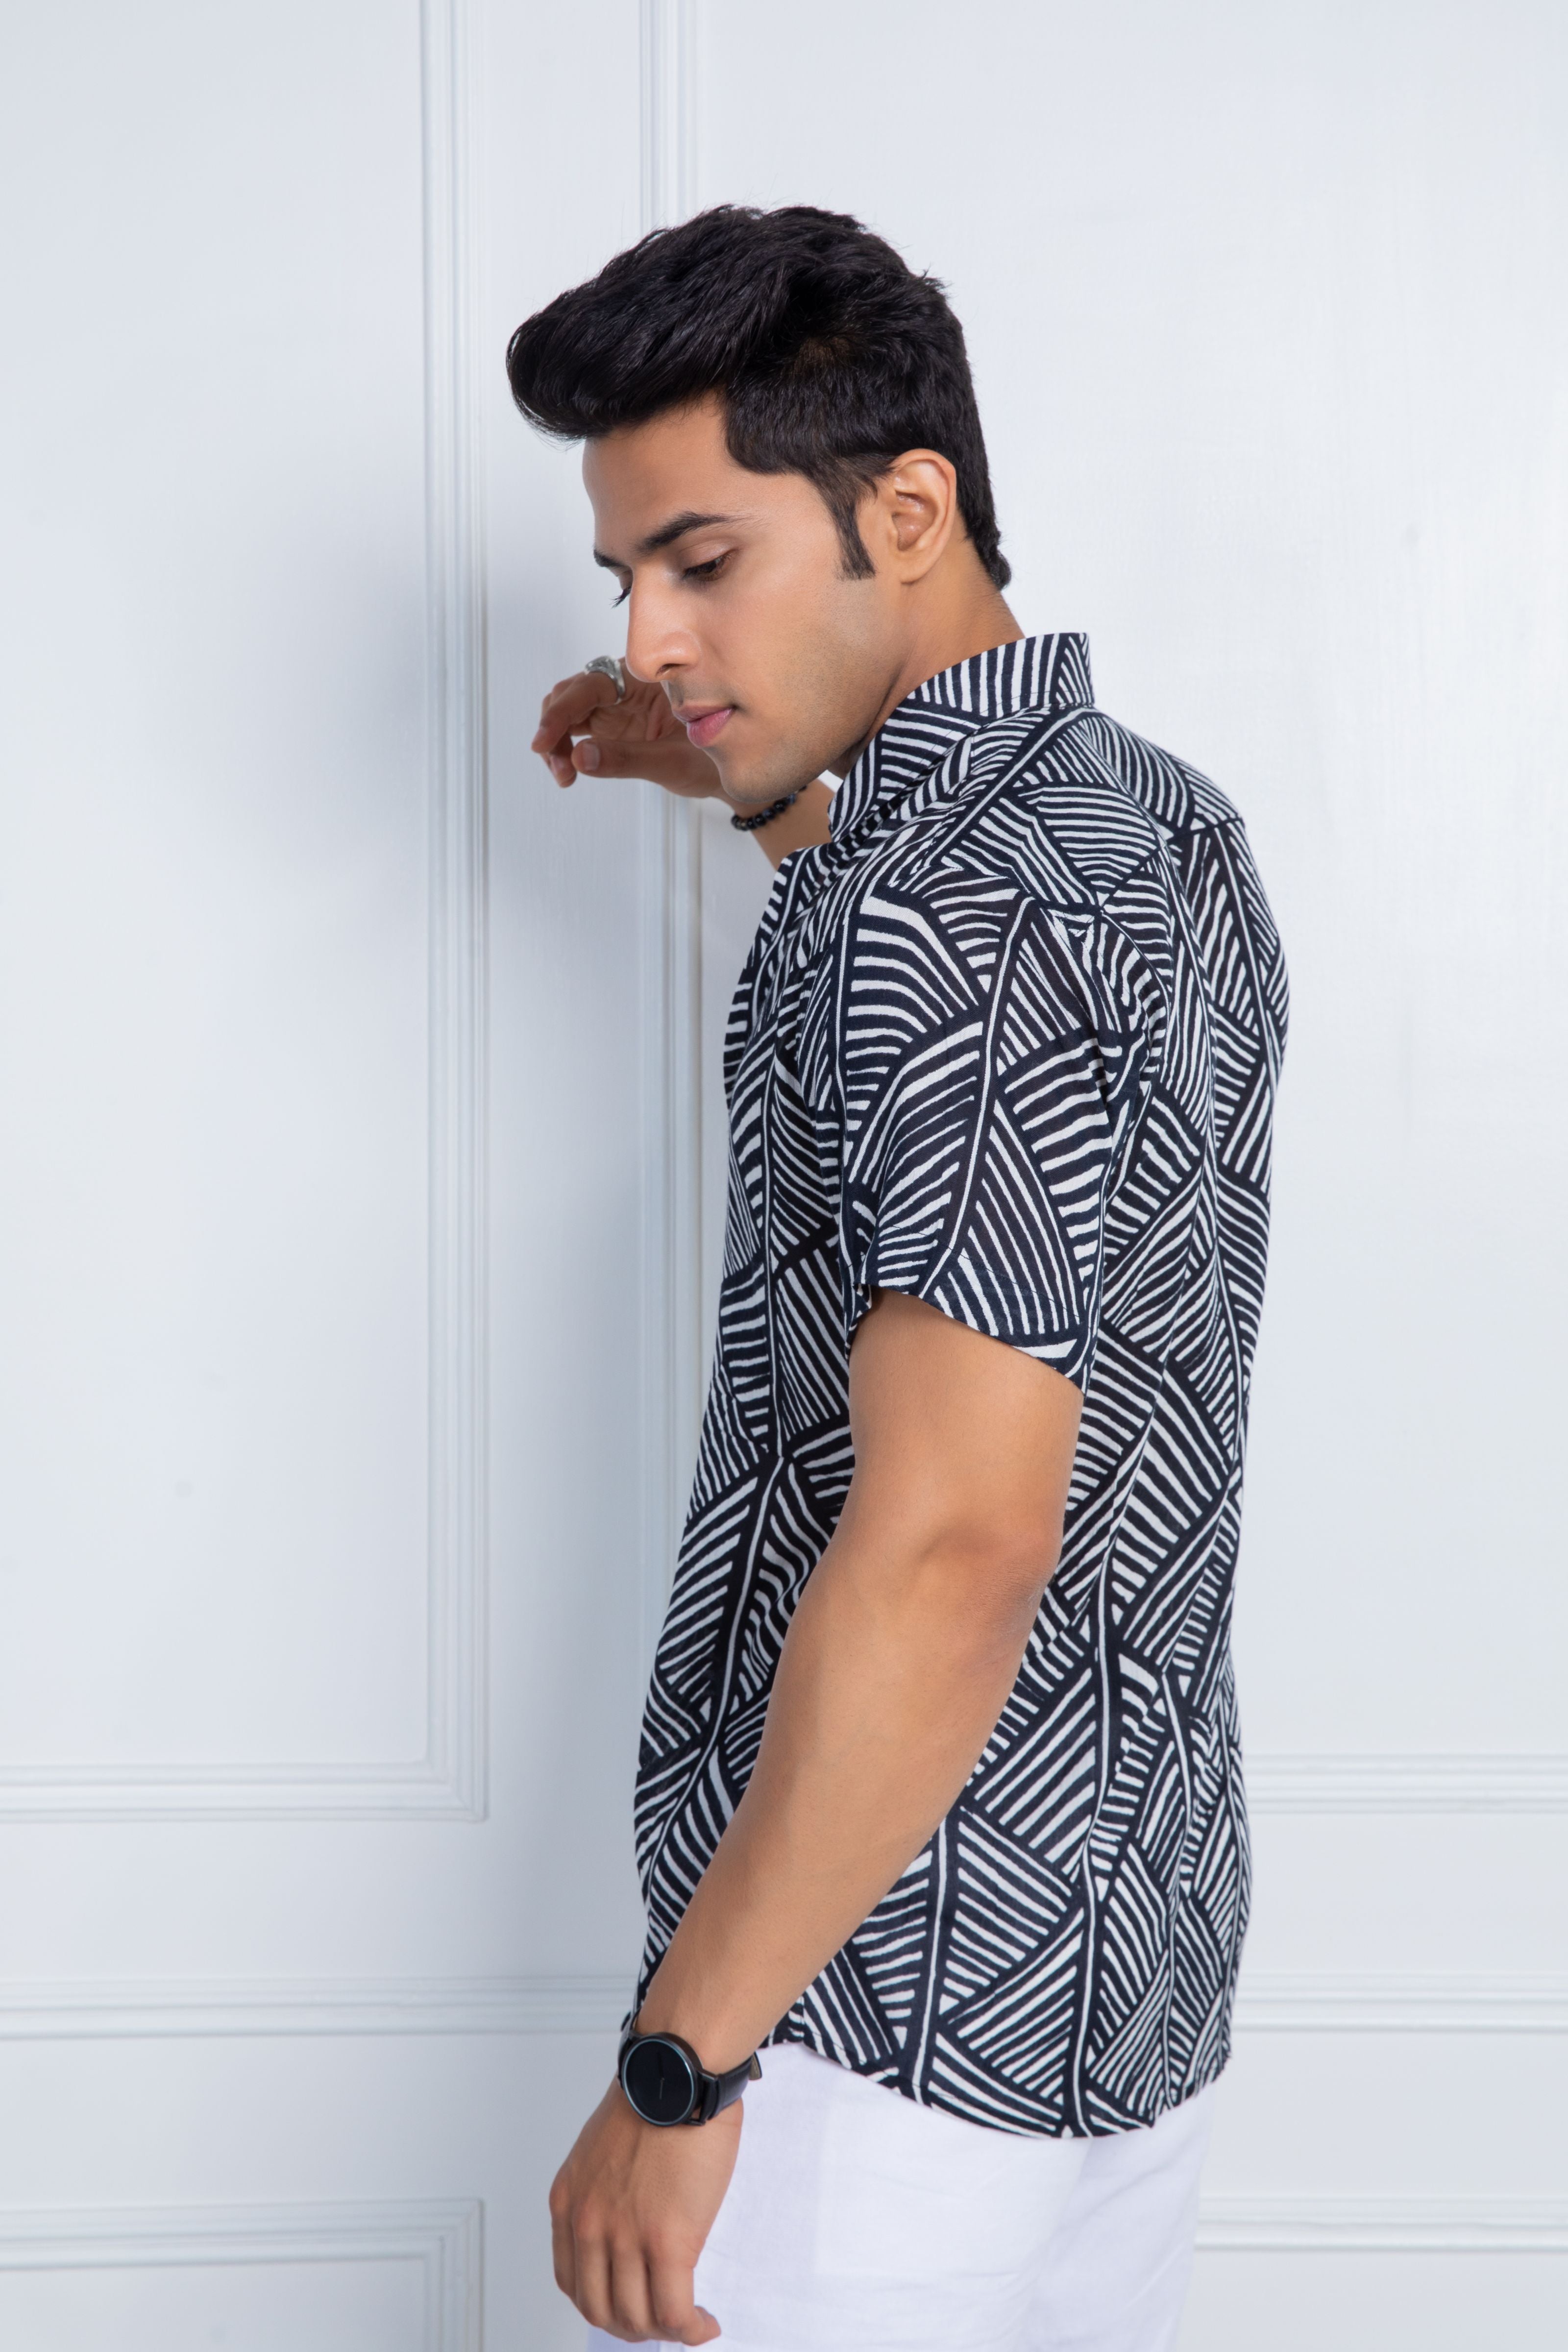 Firangi Yarn Relaxed Fit Super Flowy Re-engineered Cotton Printed Shirt- Half Sleeves (New York Black)